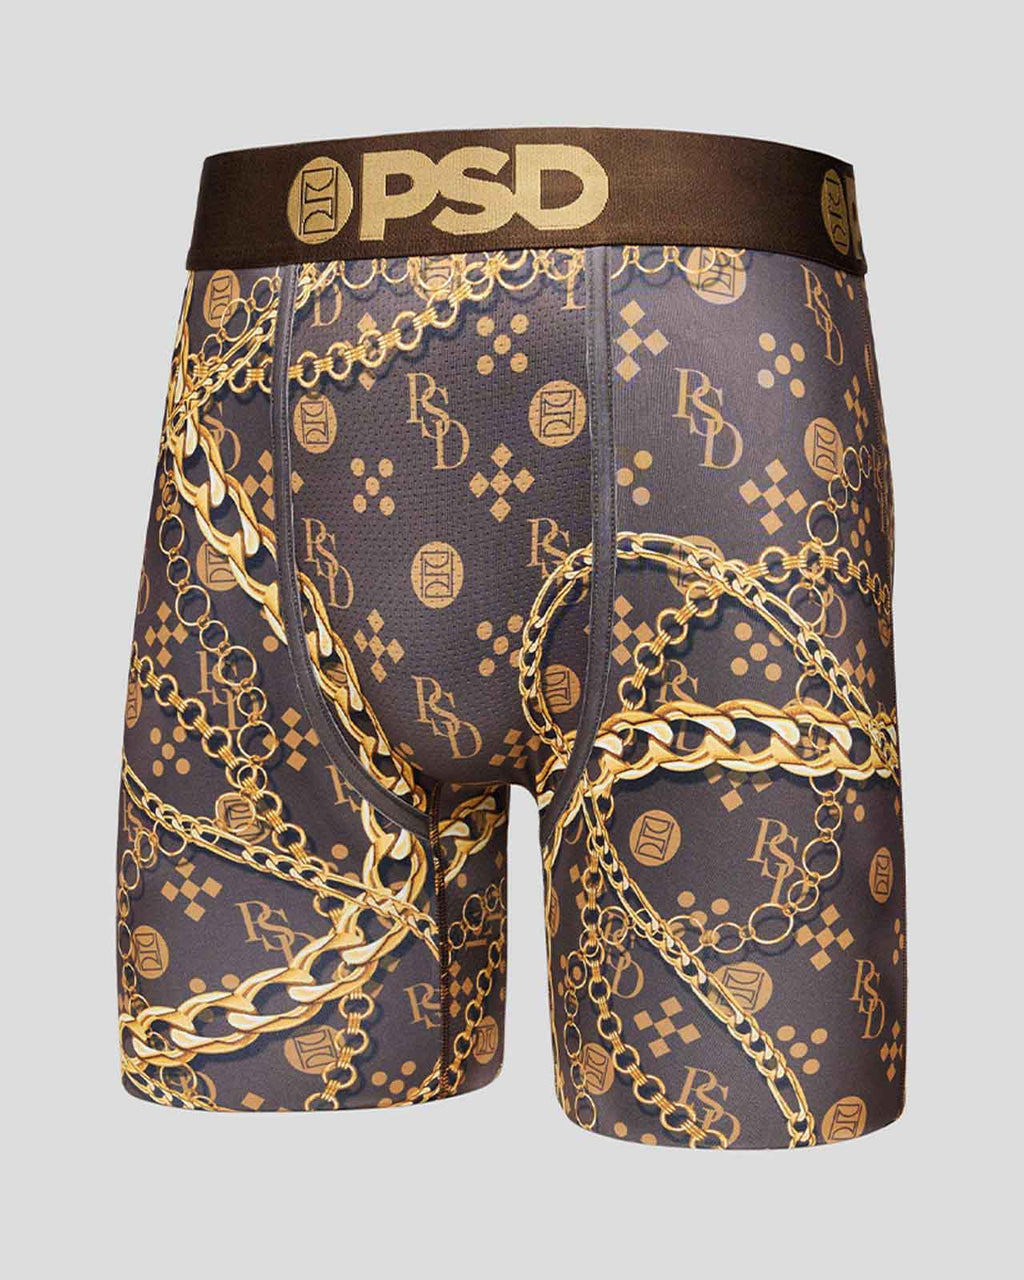 PSD BOXERS (NEW WORLD LUX) – Vip Clothing Stores